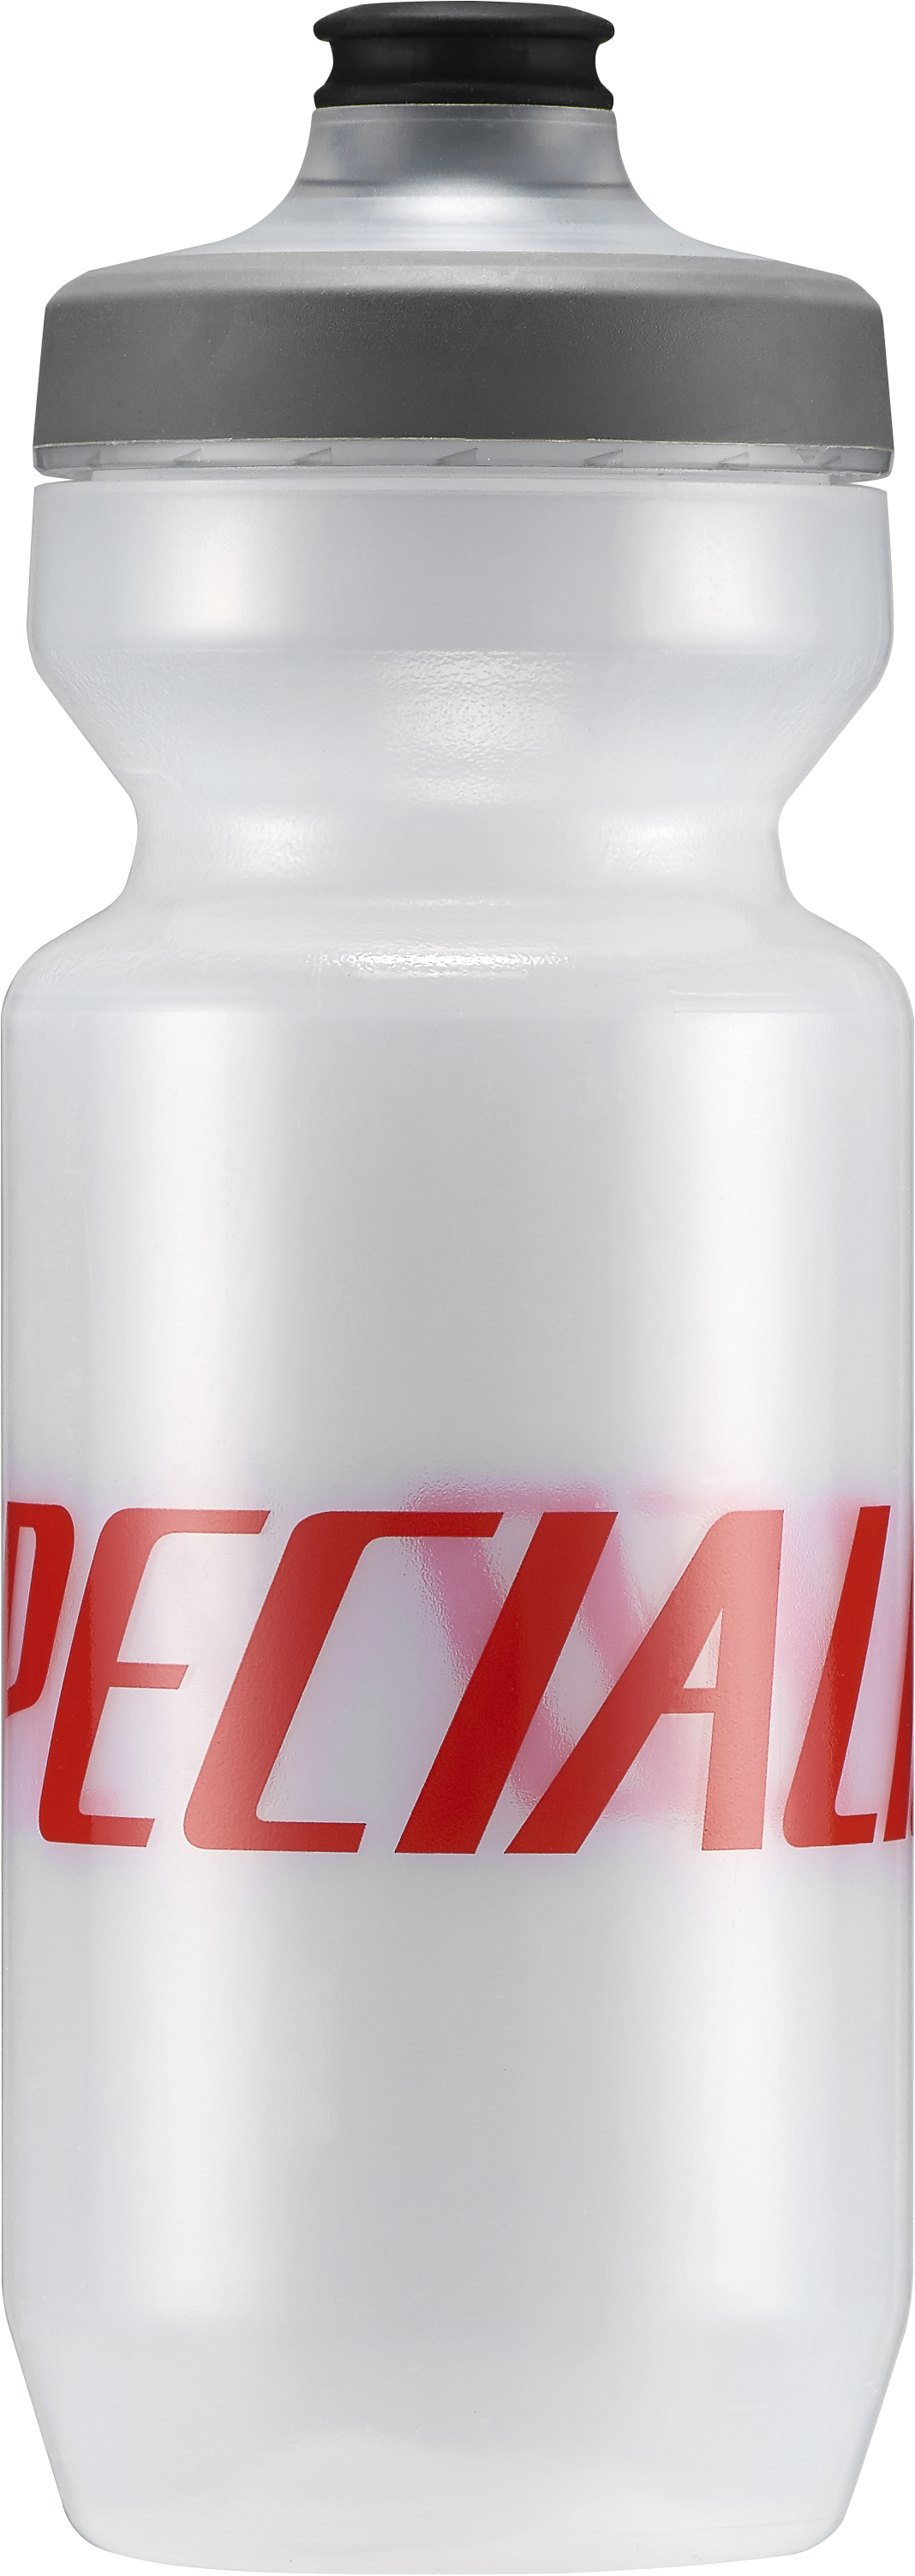  - Specialized Special Eyes Purist MoFlo "Limited Edition" 650ml Drikkedunk - Transparent